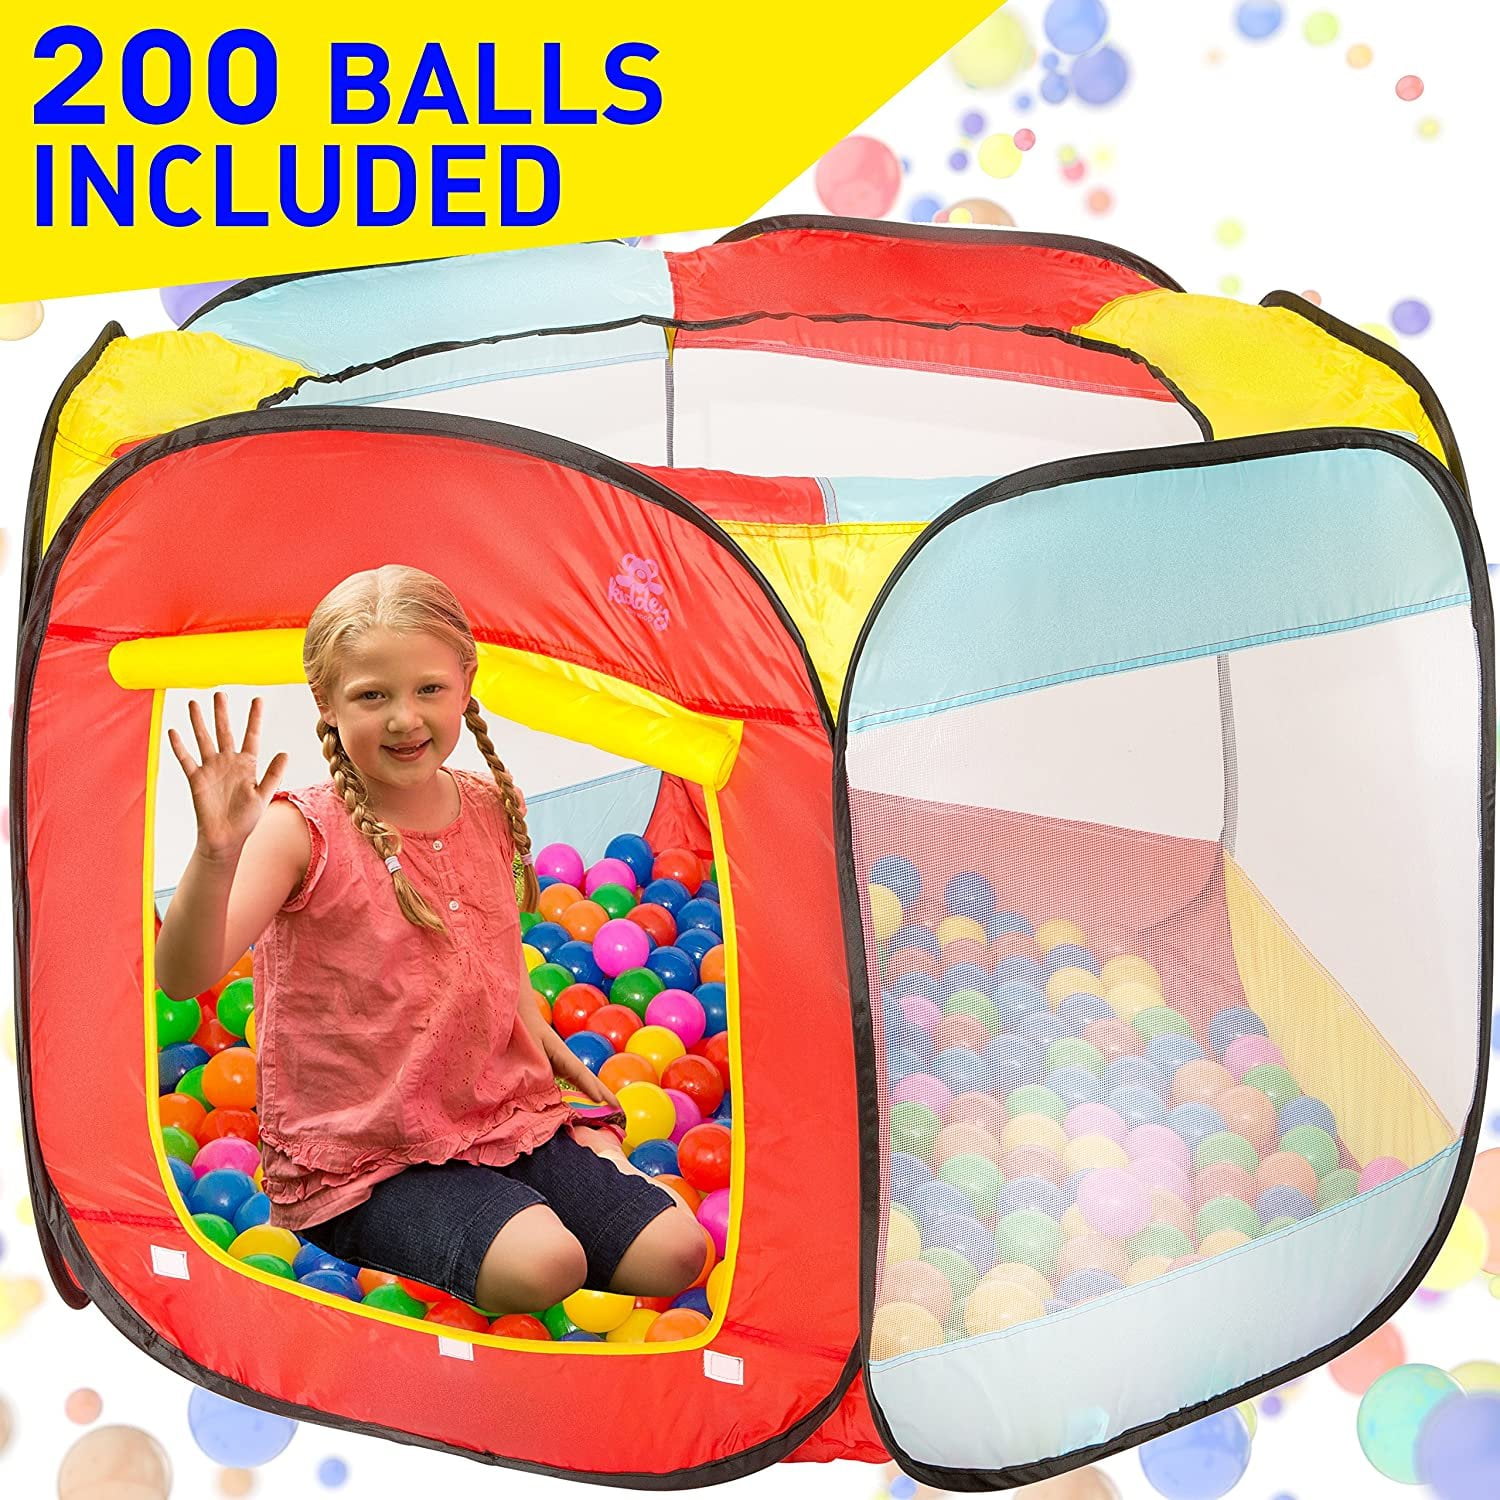 6-Sided Ball Pit For Kids Toddlers And Baby Fill With Plastic Balls Outdoor Play 